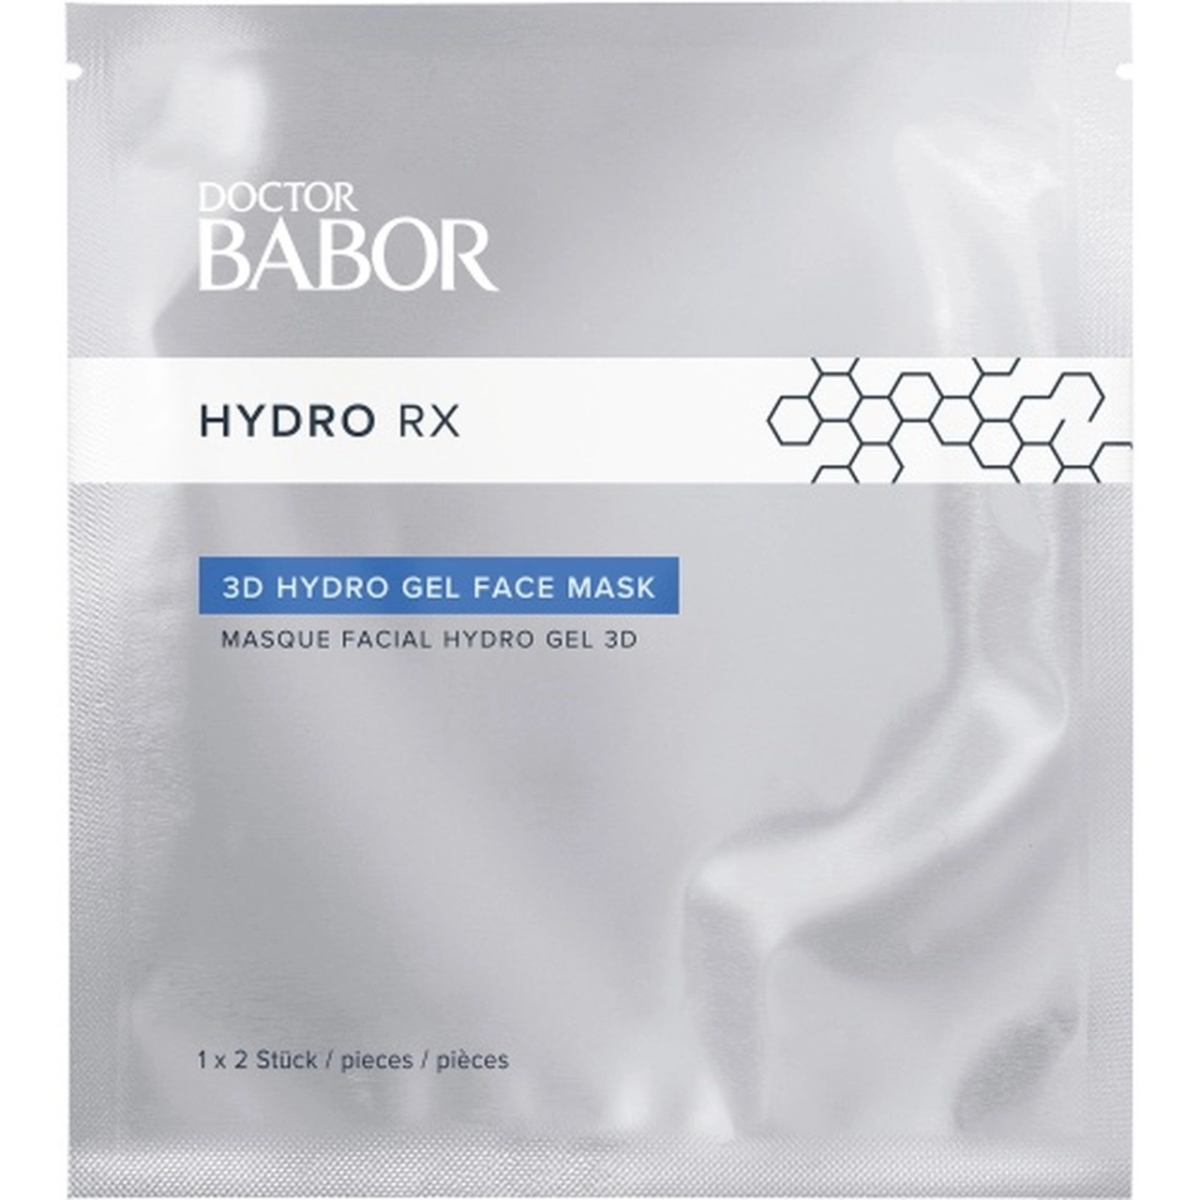 Picture of Babor 275245 Doctor Babor Hydro RX 3D Hydro Gel Face Mask, 4 Piece